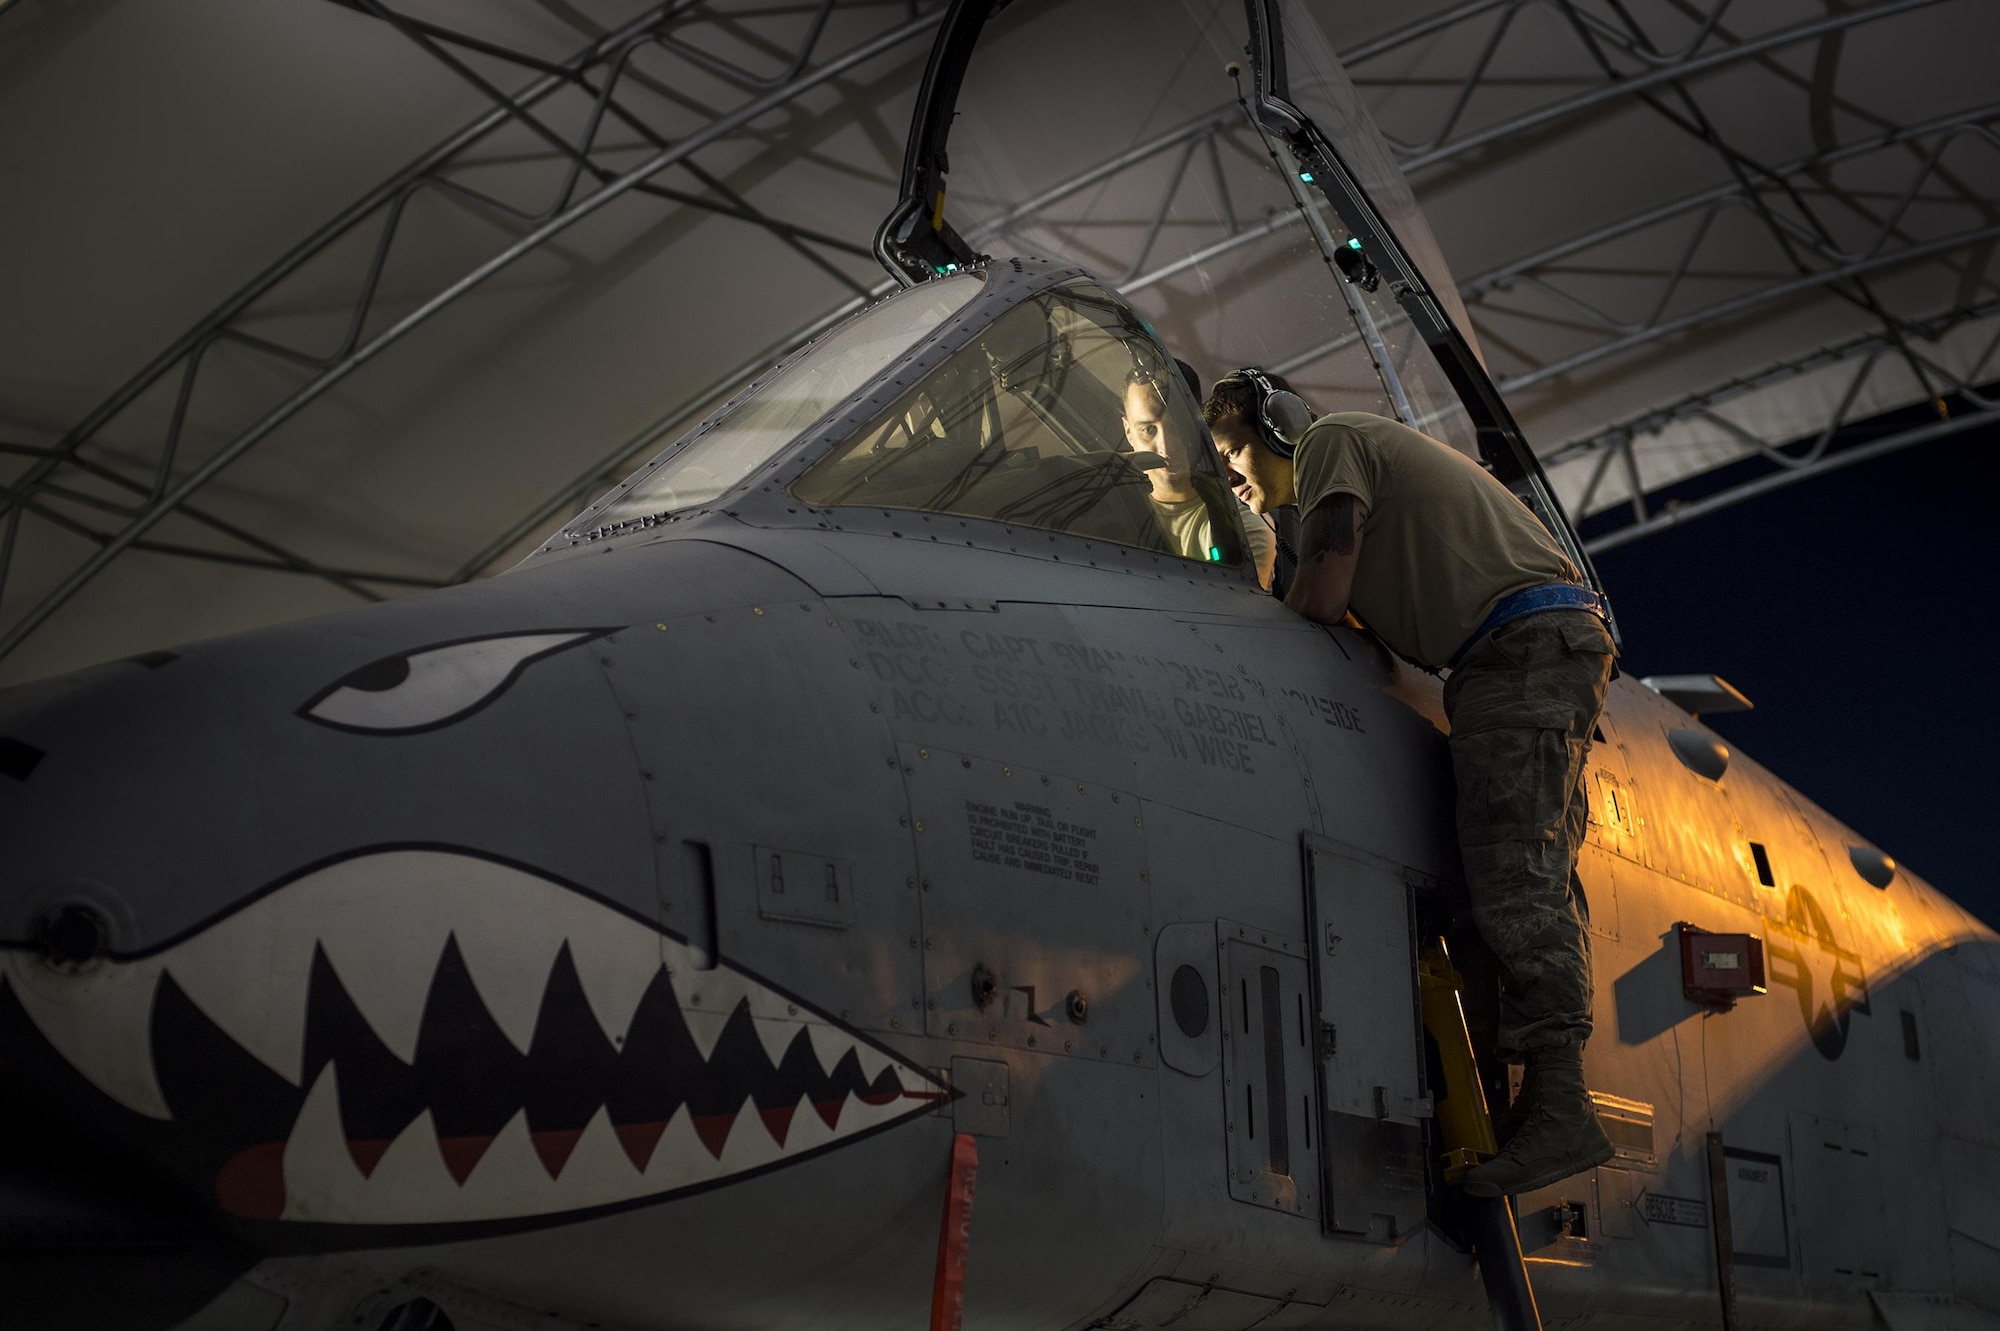 U.S. Air Force Senior Airman Jonathan Buzhardt, 74th Aircraft Maintenance Unit electrical and environmental systems journeyman, assists Staff Sgt. Matthew Hebert, 74th AMU avionics specialist technician, with the repair of a display in an A-10C Thunderbolt II, March 10, 2016, at Moody Air Force Base, Ga. The 74th AMU swing shift maintainers repair broken aircraft and perform routine servicing each night in order to maintain mission capability. (U.S. Air Force photo by Airman 1st Class Lauren M. Johnson/Released)